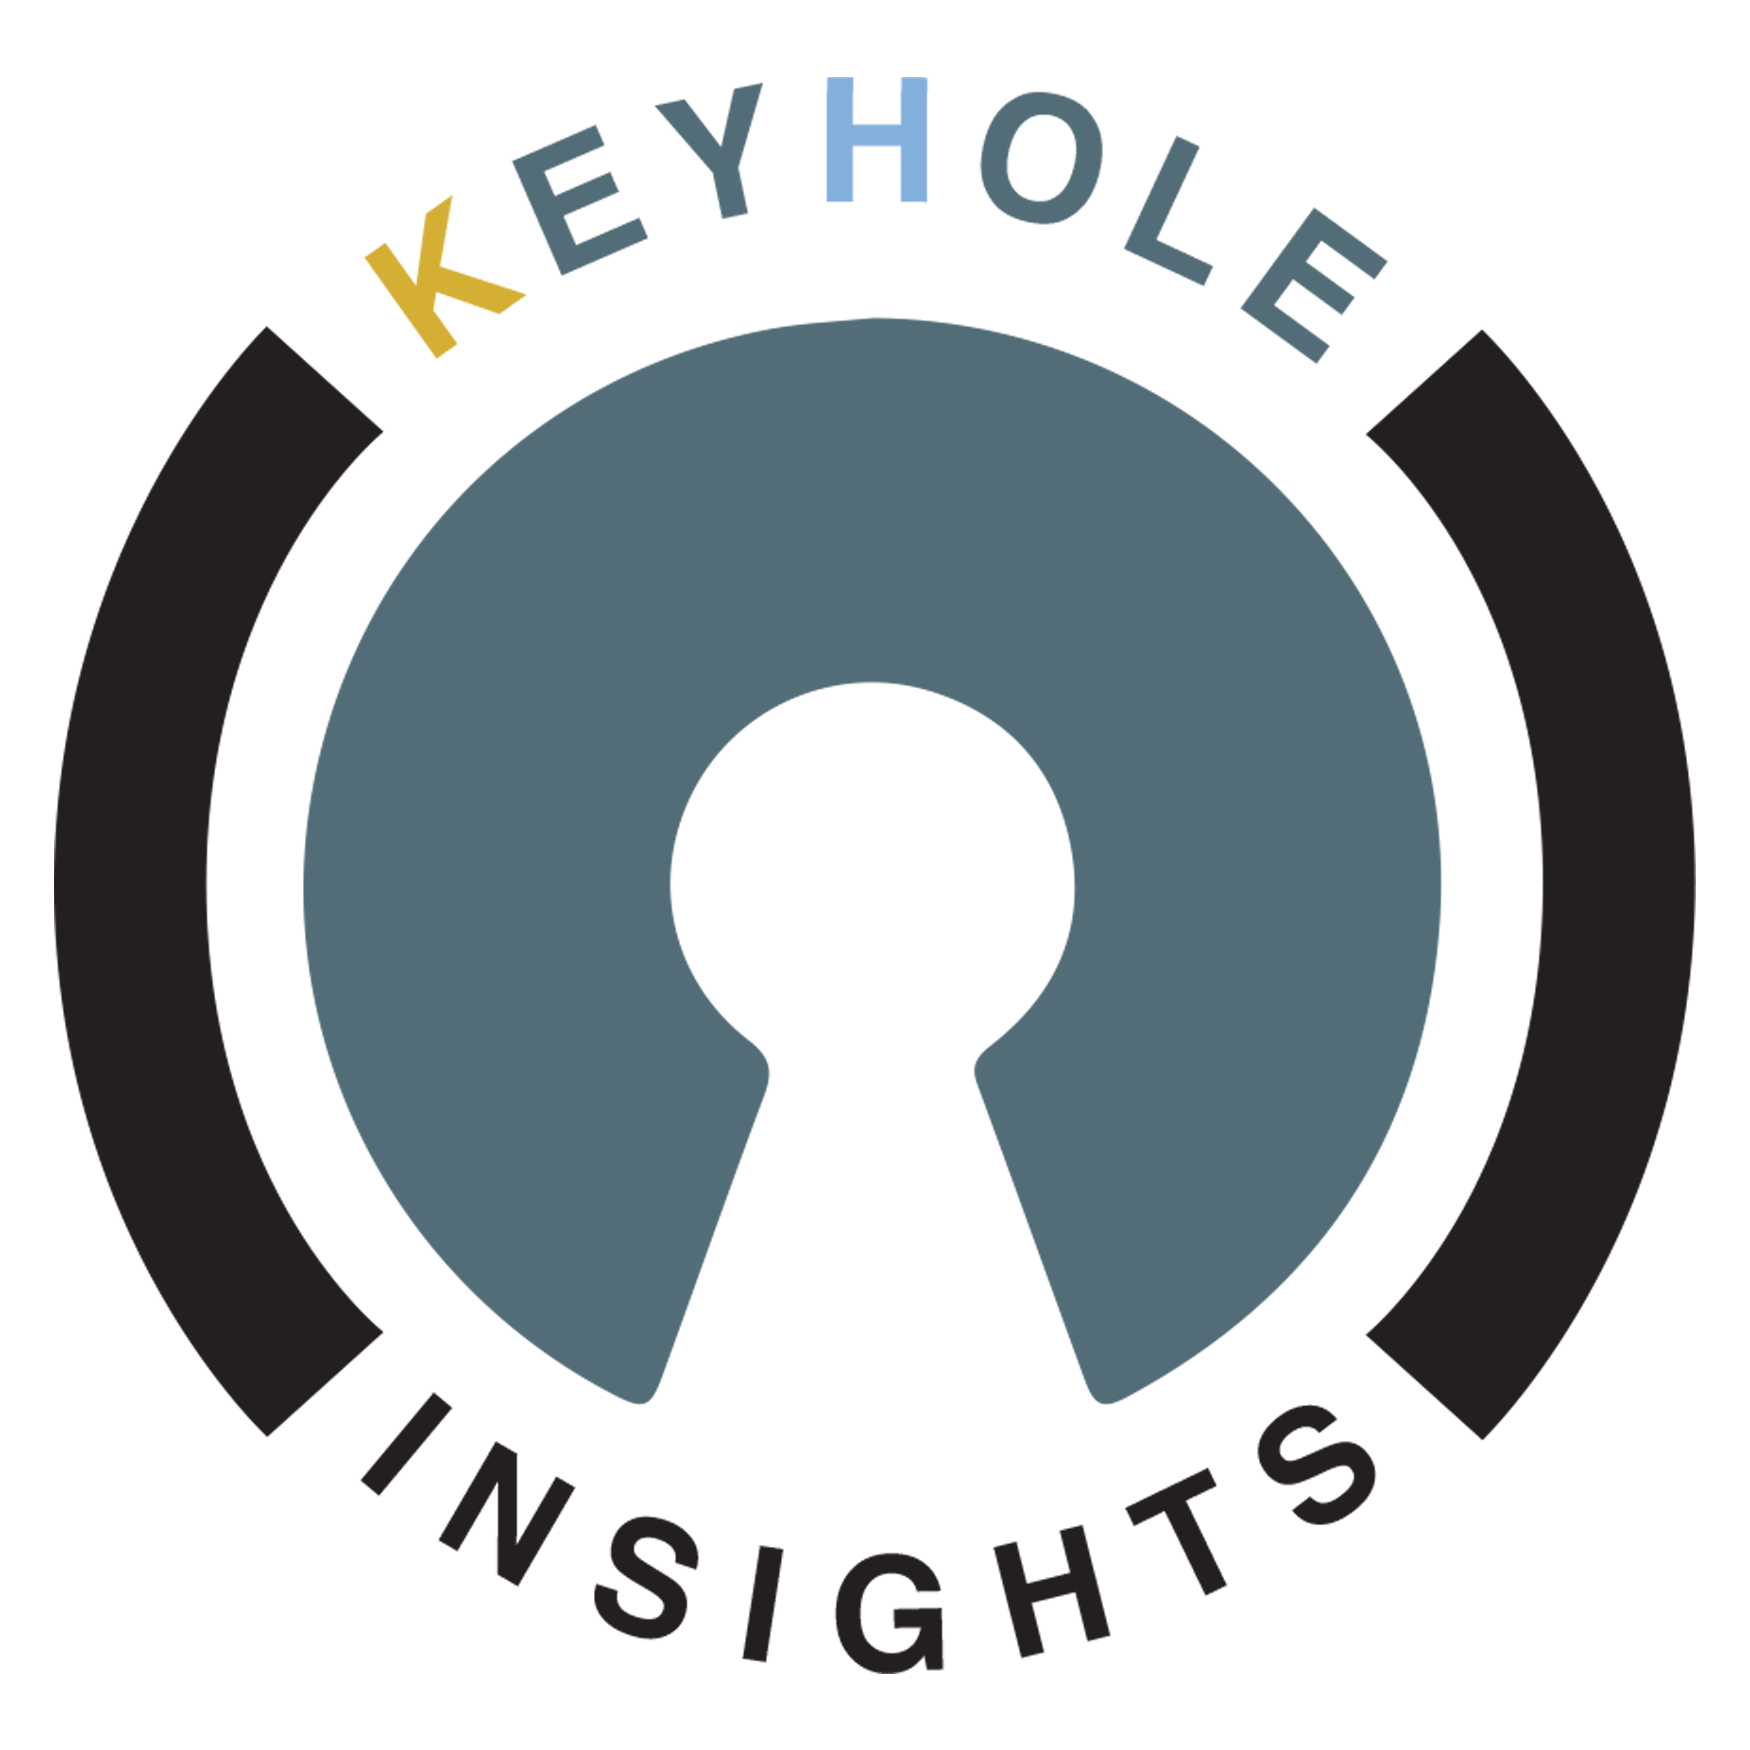 KEYHOLE INSIGHTS profile on Qualified.One